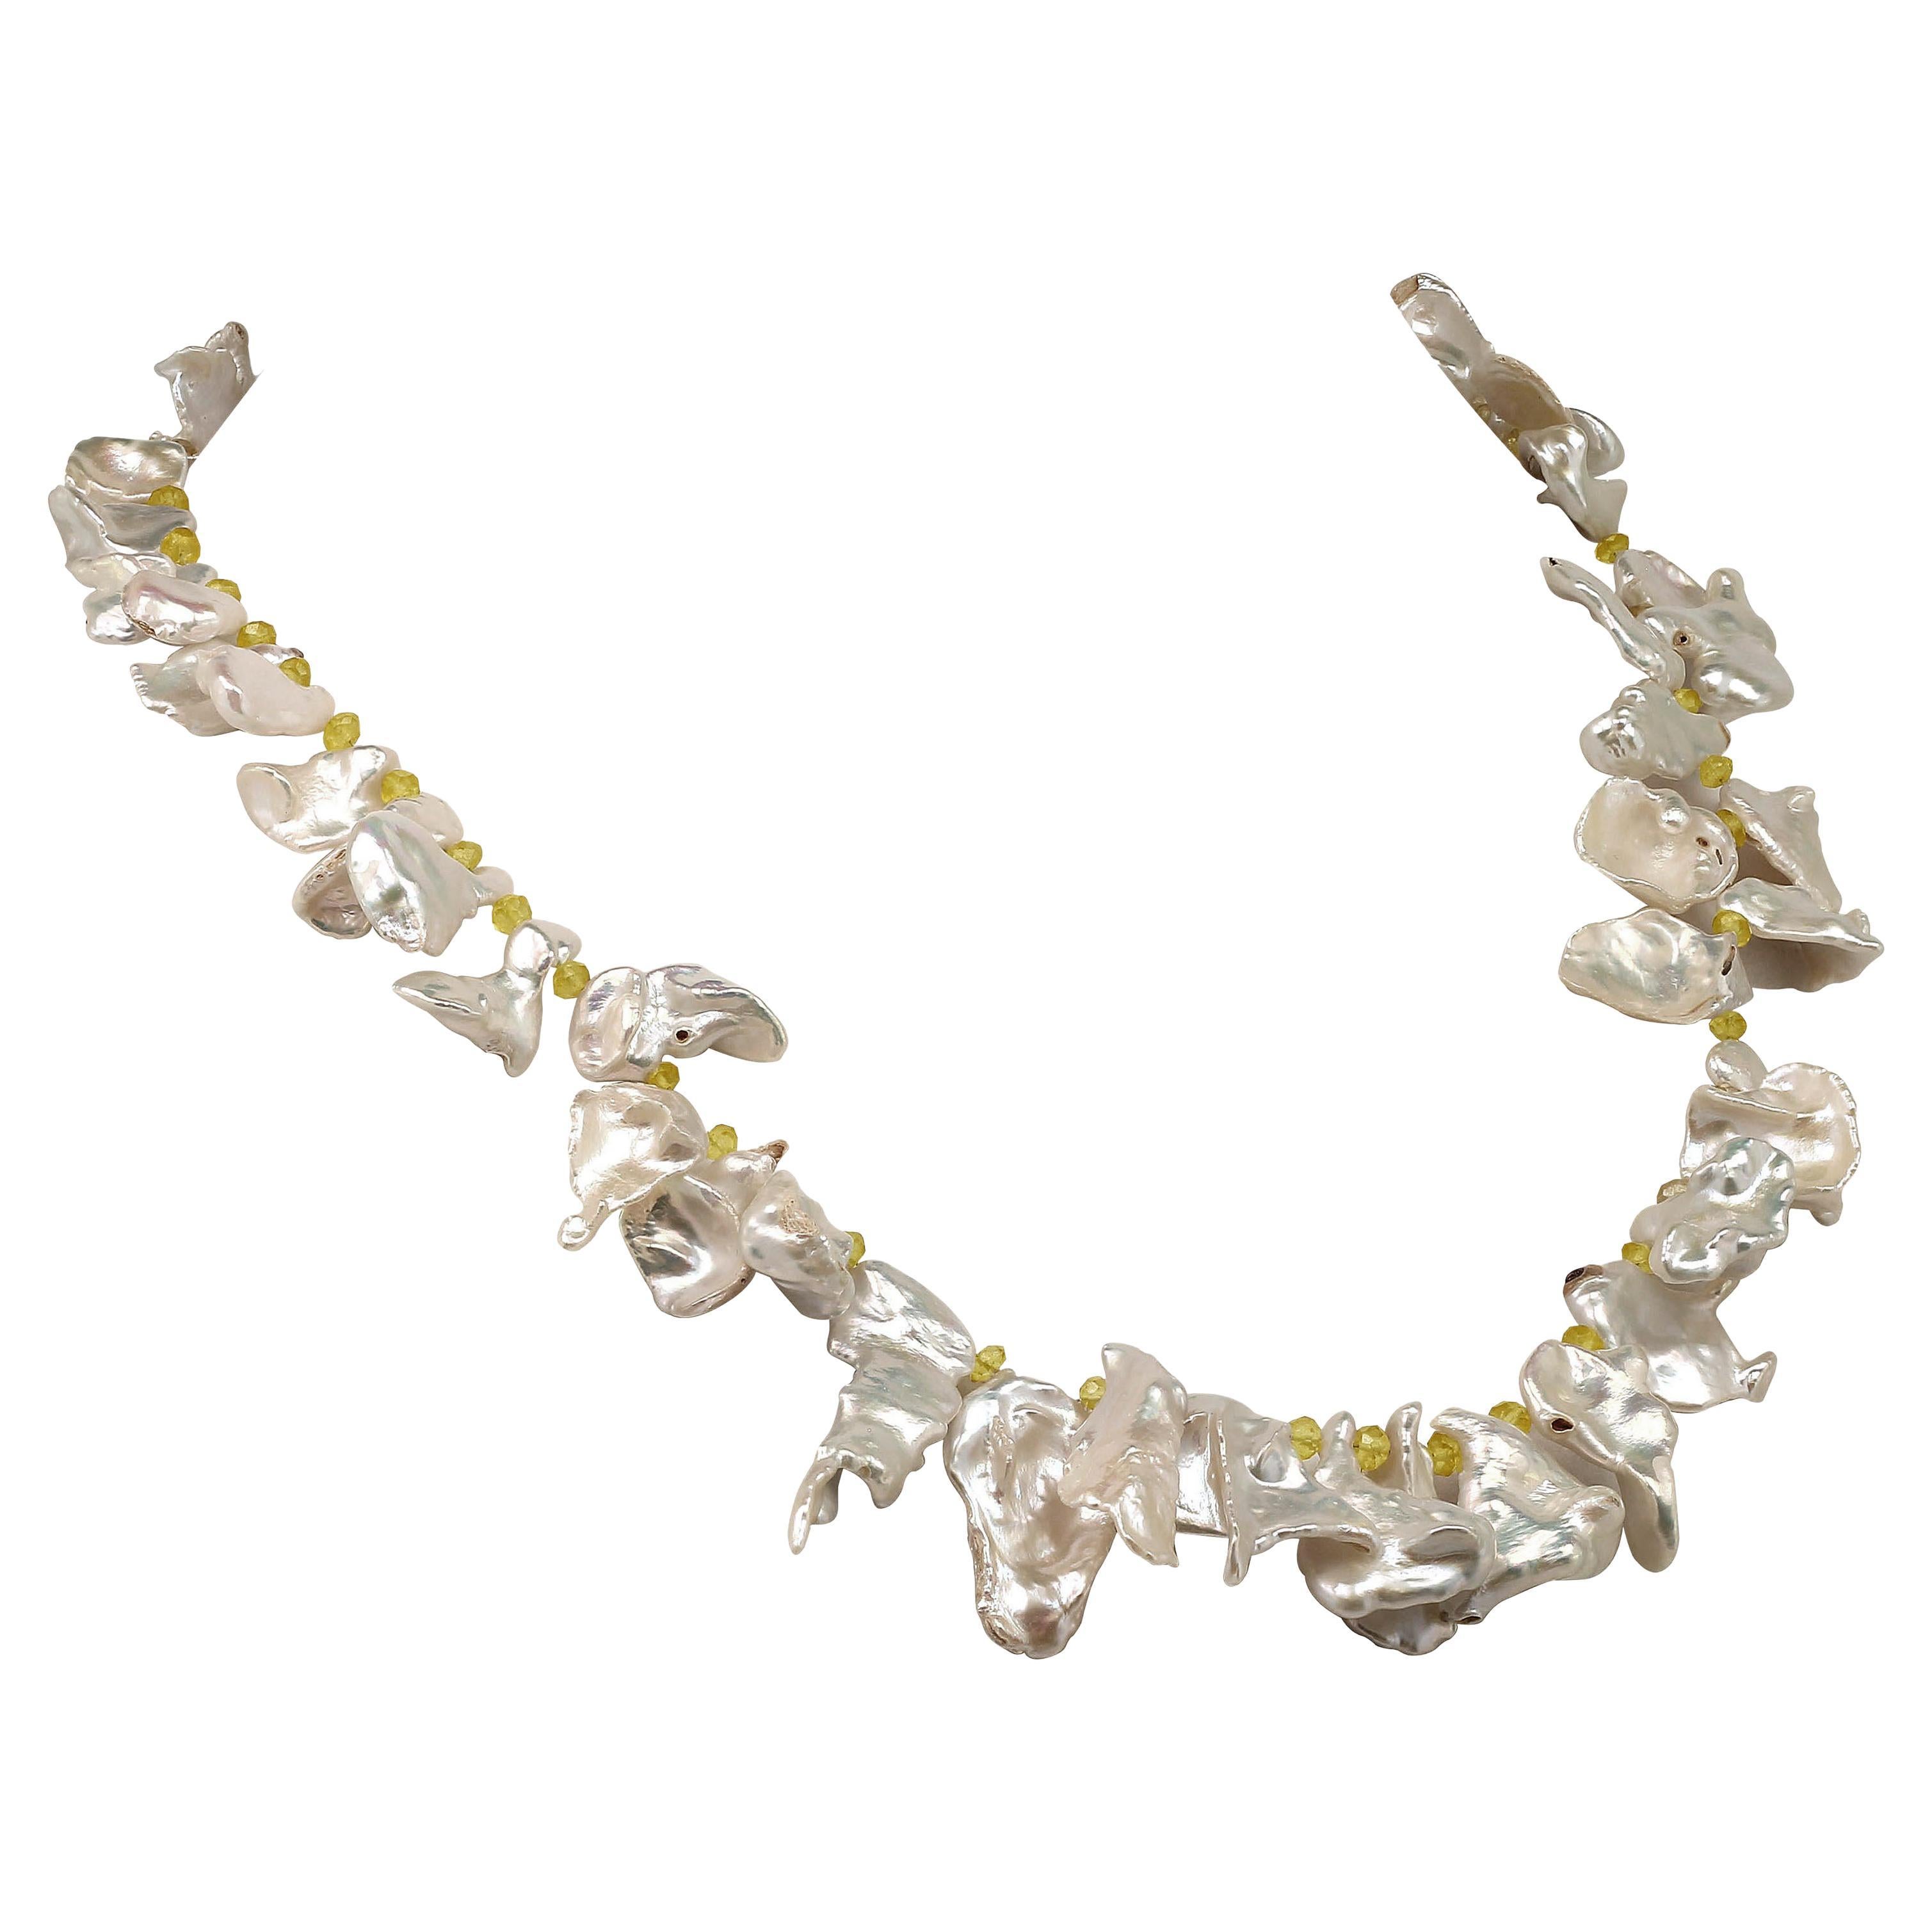 Because you deserve to own pearls
Custom made, 25 inch iridescent white Keshi Pearl necklace with accents of golden yellow Citrine rondelles. These lovely, glowing Pearls give off a magical iridescence. They are mostly free form graduating from